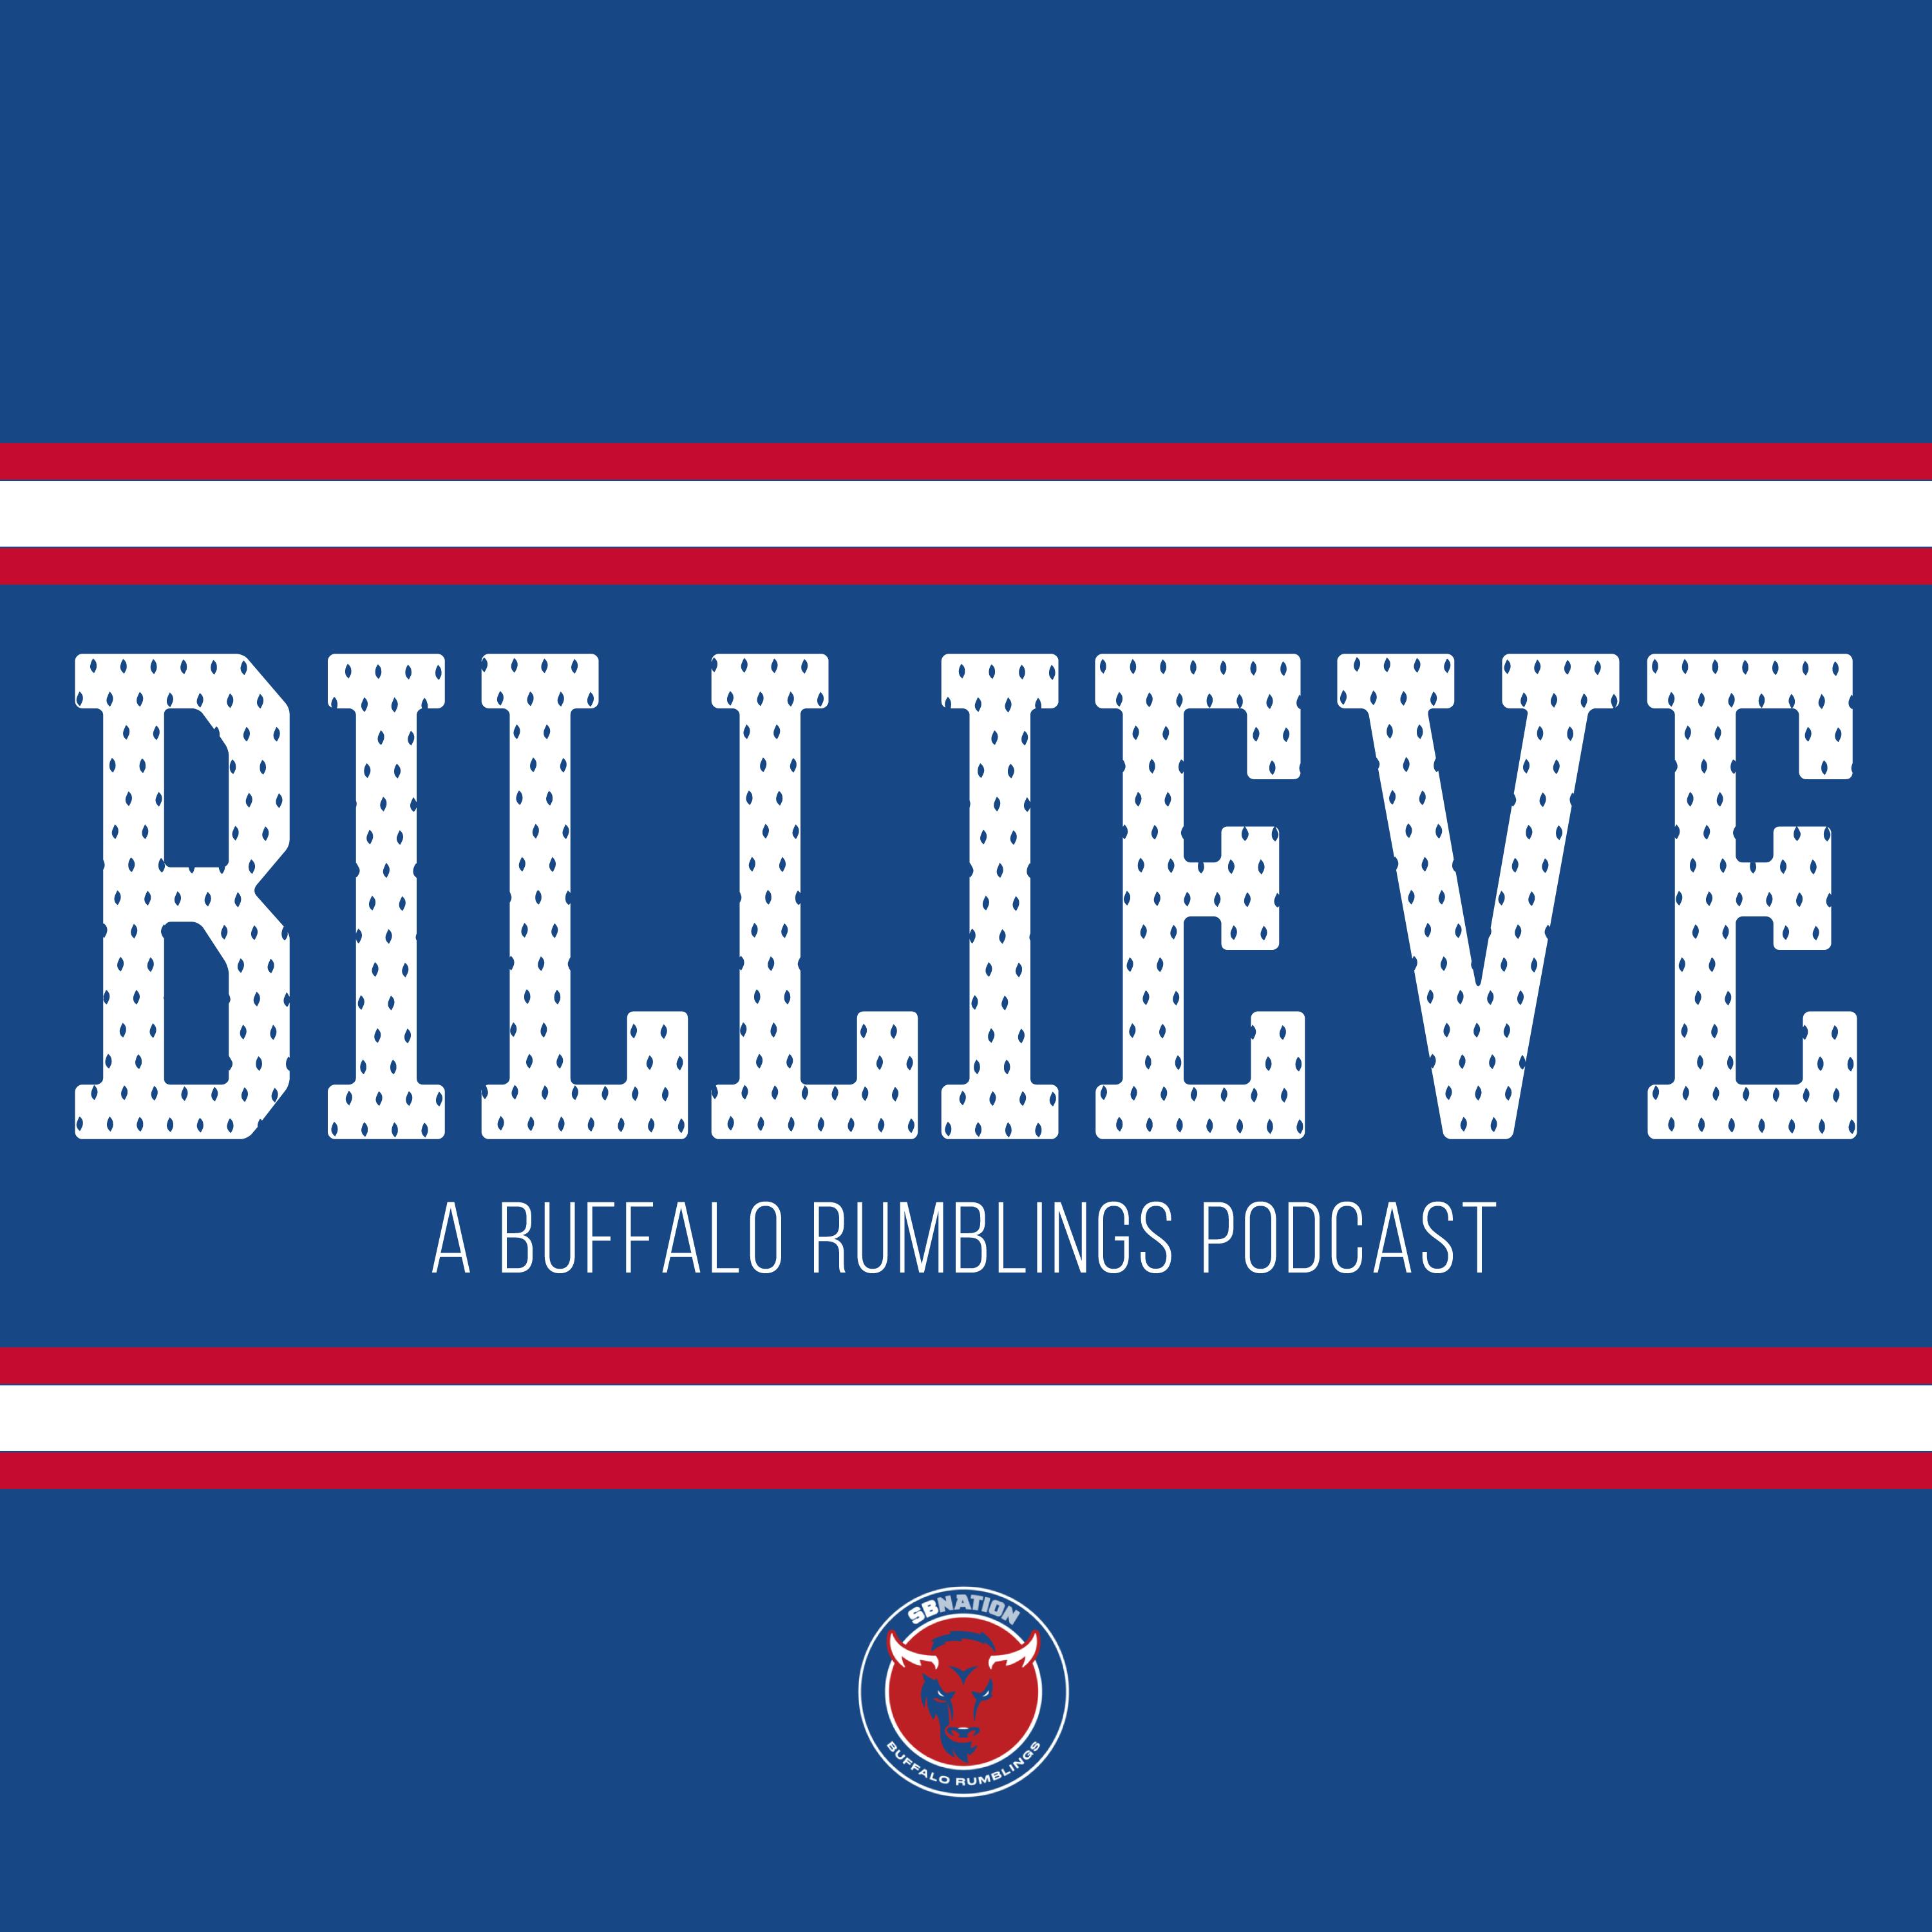 Billieve: Eagles Loss, Fan Expectations, Inactive Trade Deadline